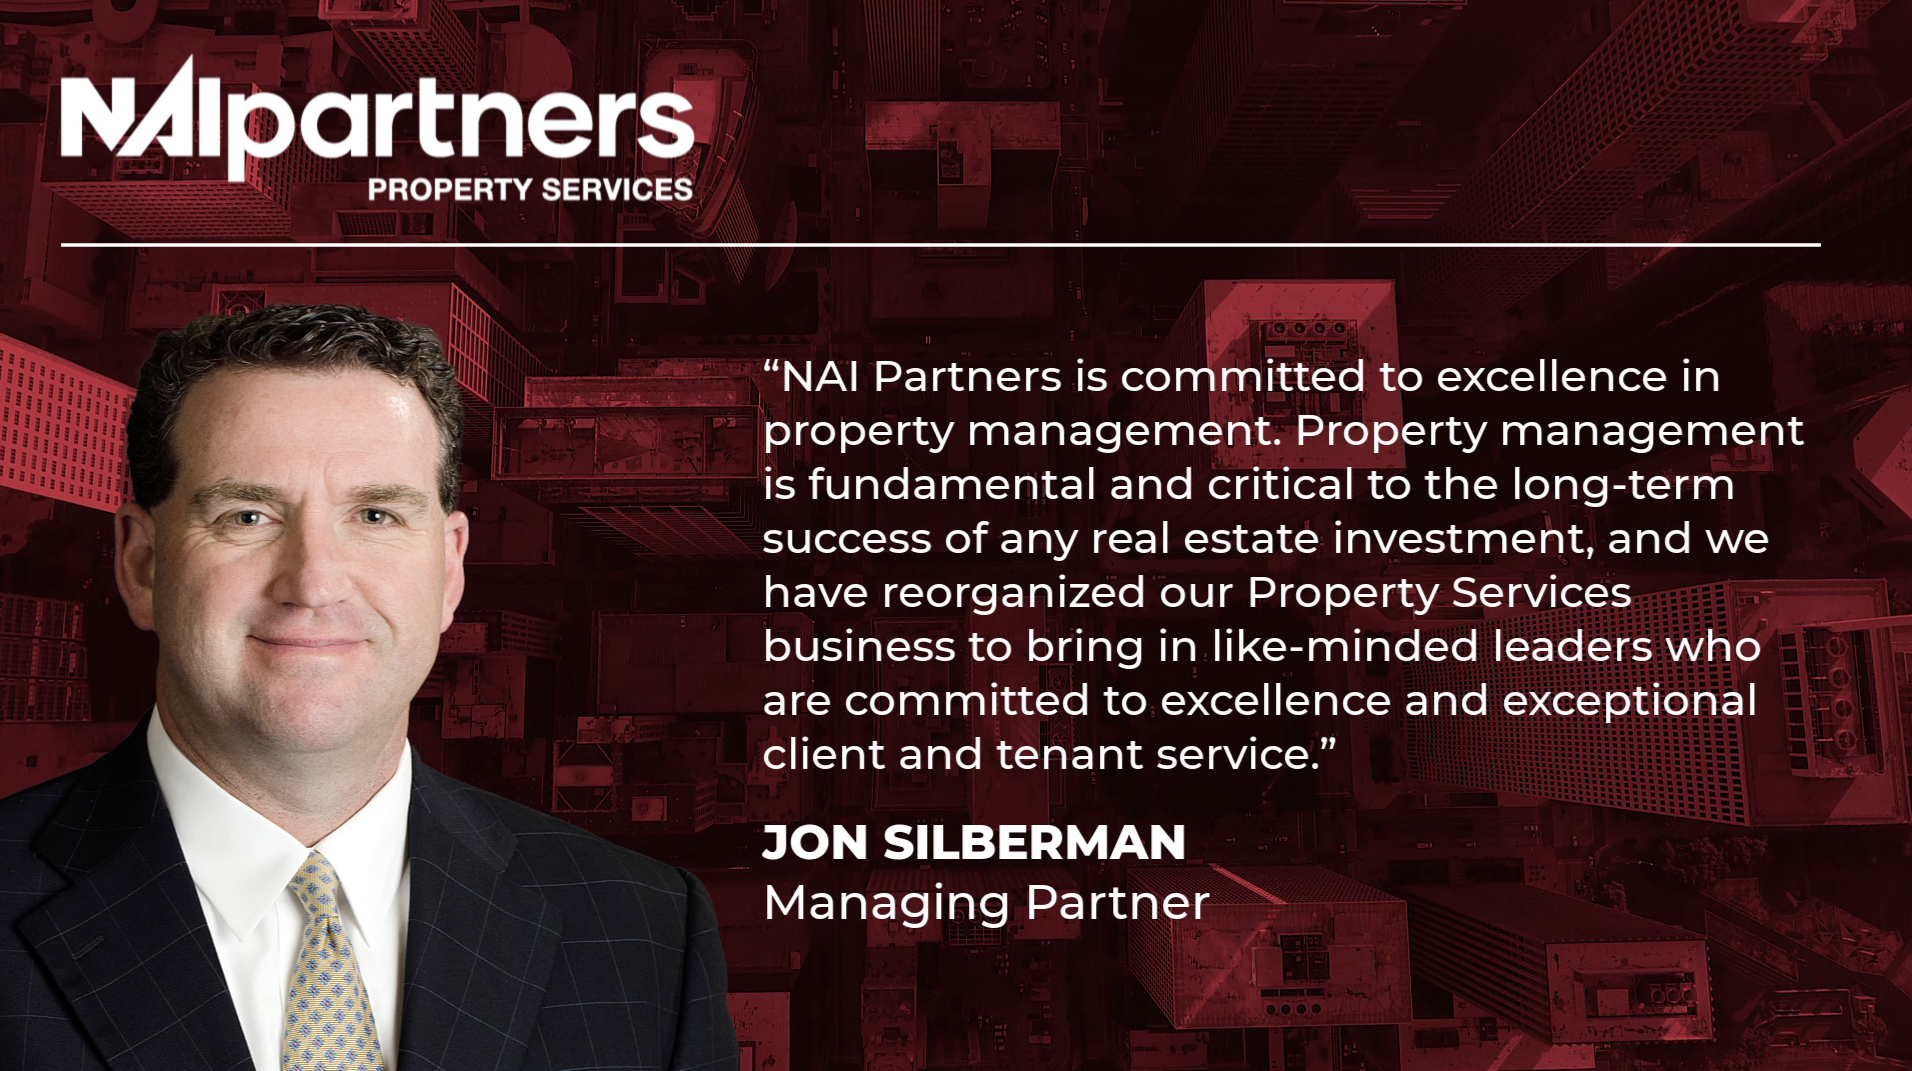 NAI Partners’ Property Services Division is 2nd-largest in Houston among privately-held and independently-owned full-service CRE firms